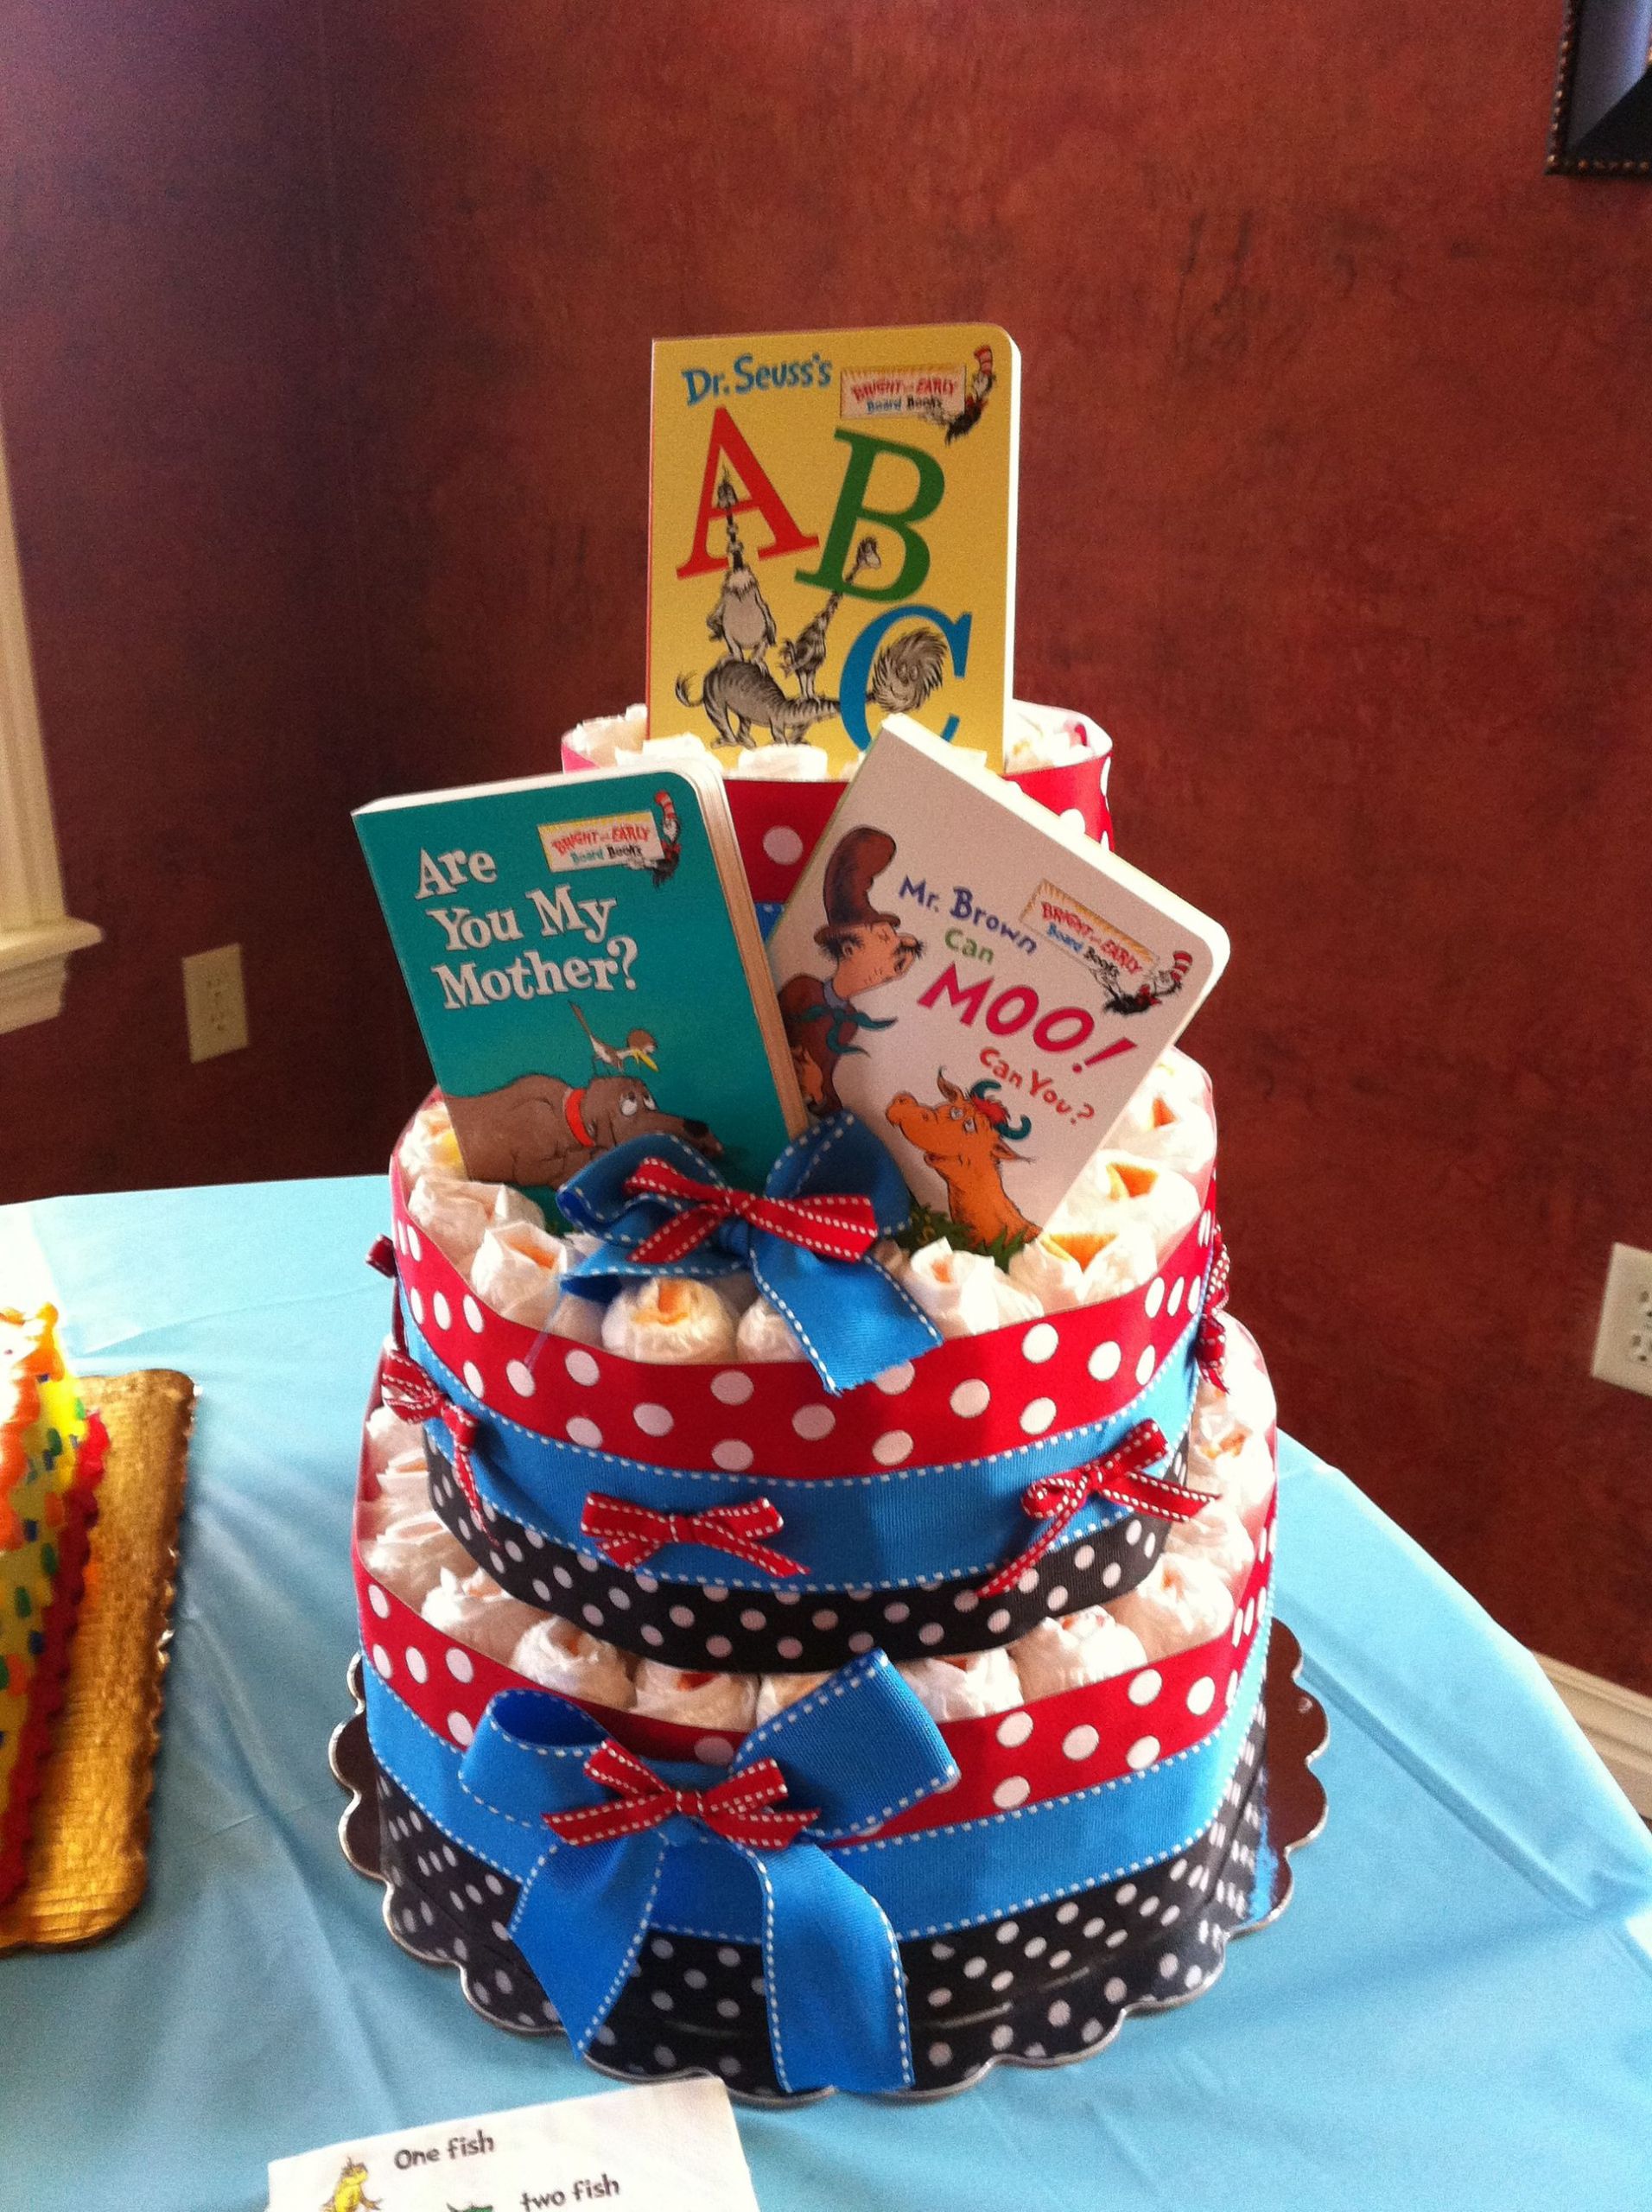 Dr Seuss Baby Gift Ideas
 Diaper cake made for a Dr Seuss themed baby shower It was